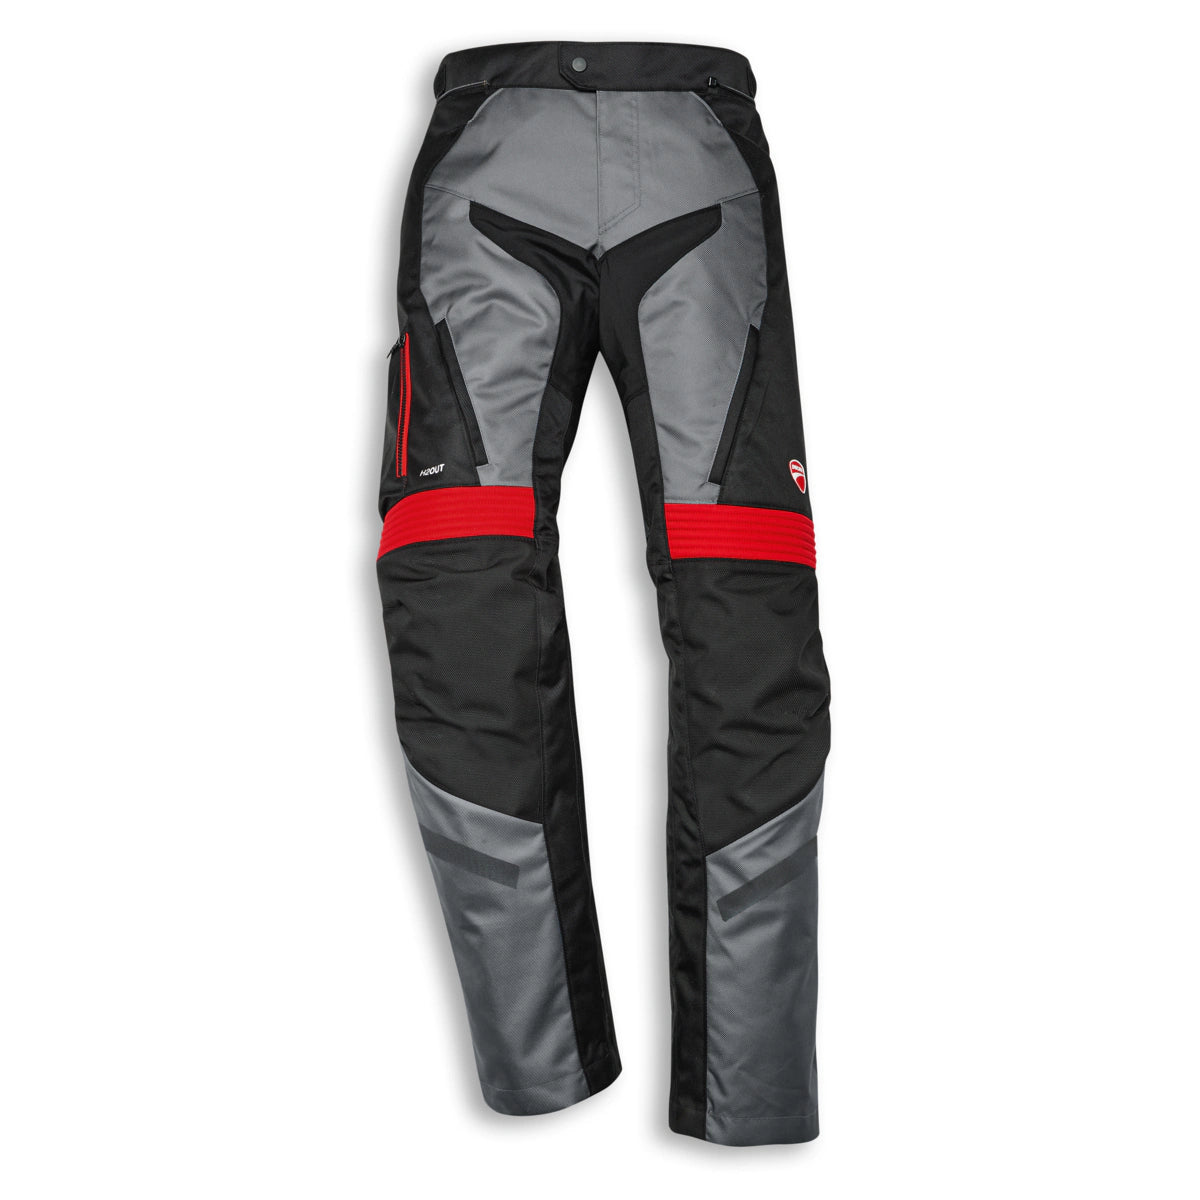 Motorcycle Pants with Armor | NBT Clothing